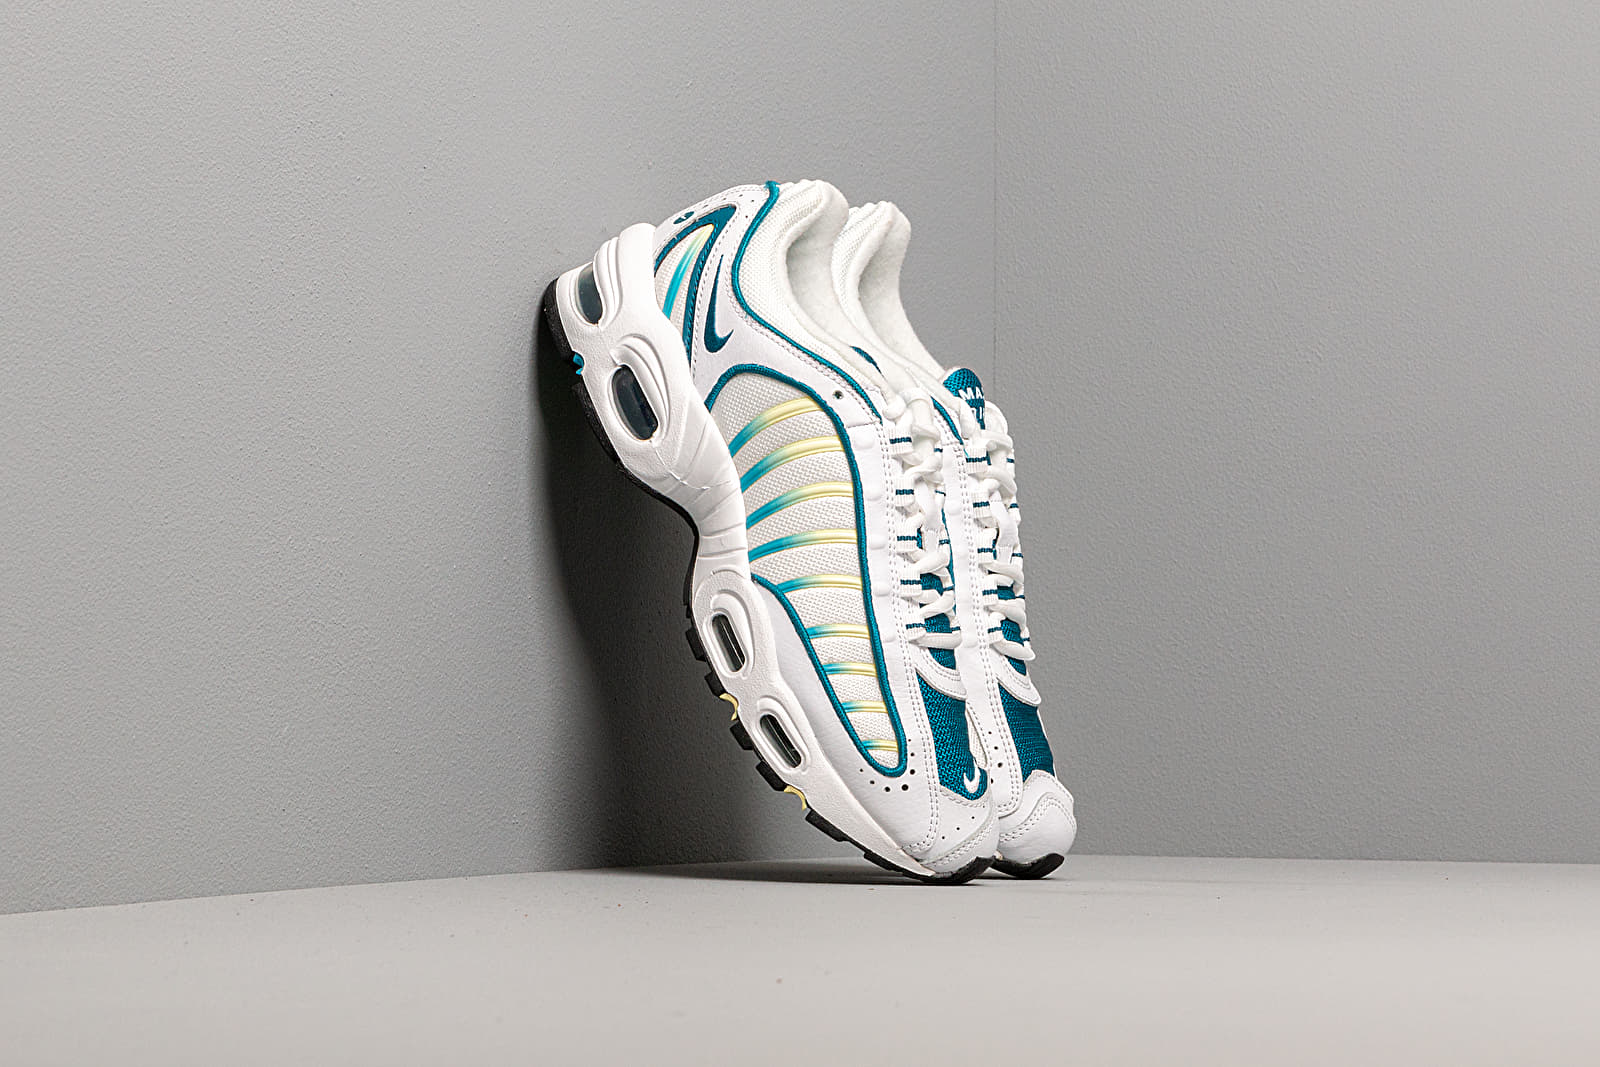 Dámske topánky a tenisky Nike W Air Max Tailwind IV White/ Green Abyss-Electric Green